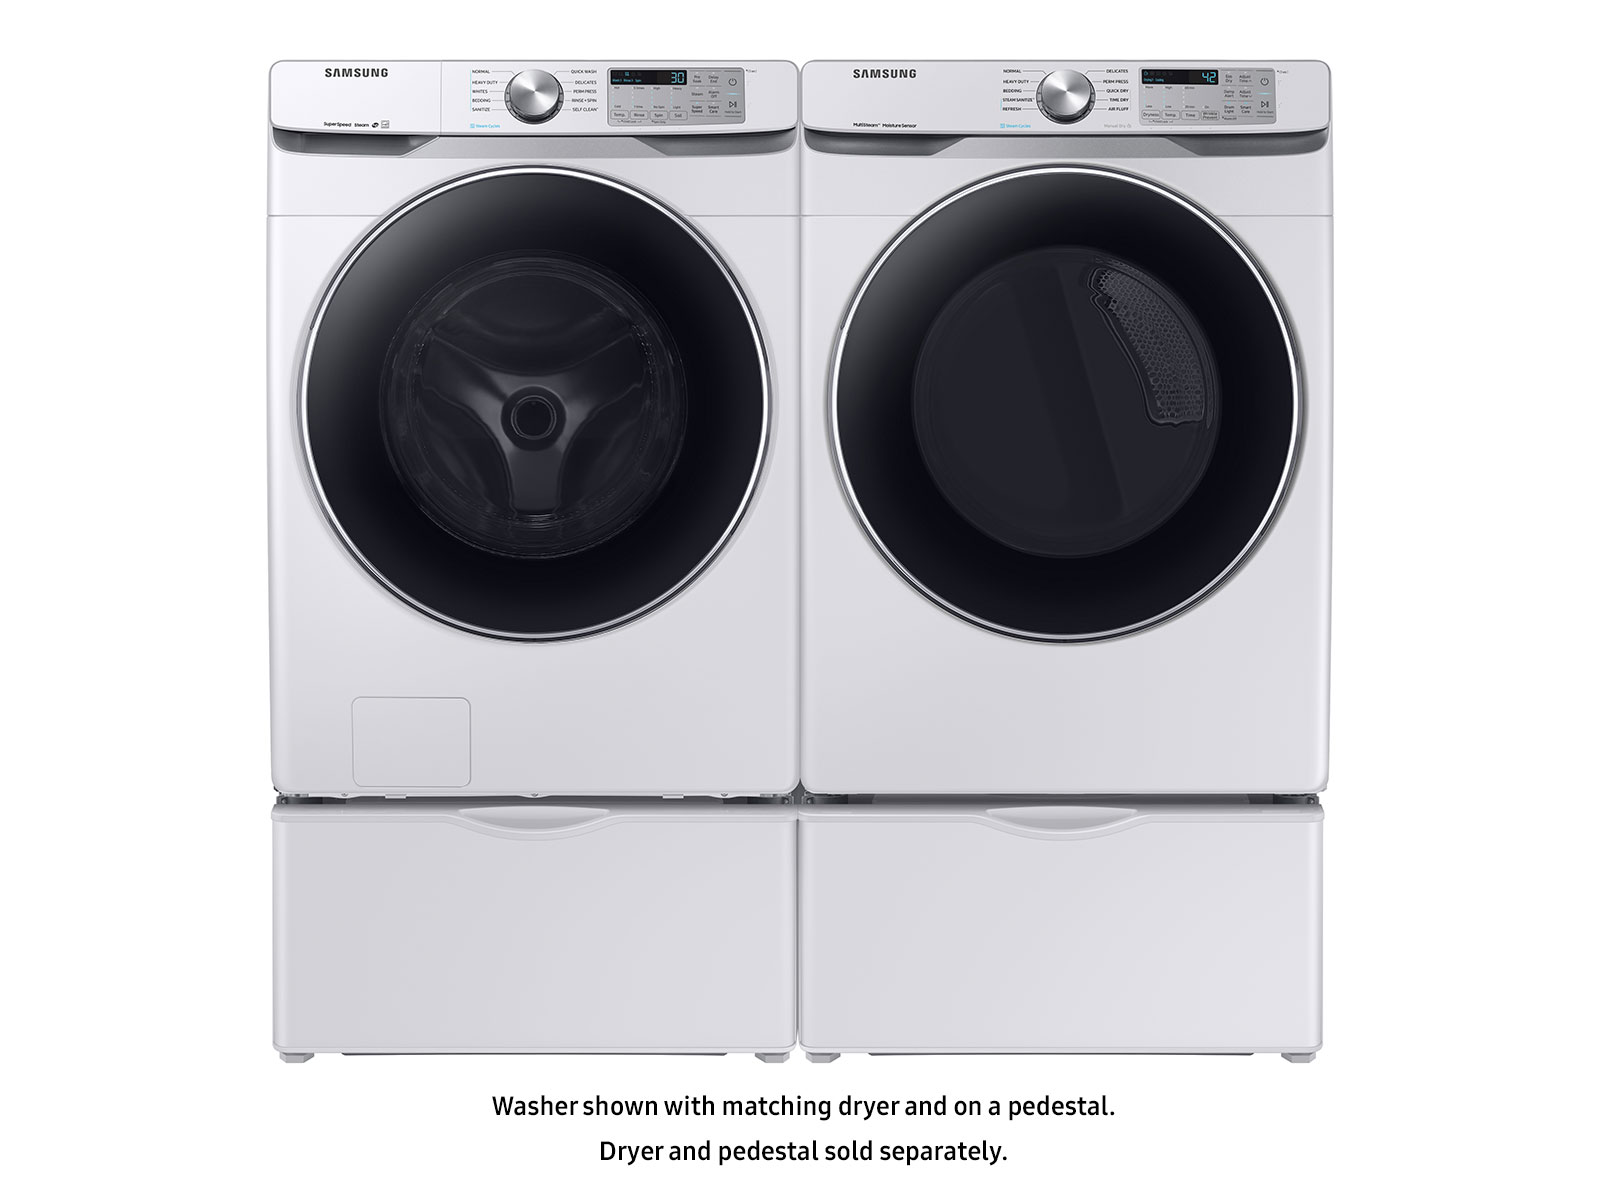 Whirlpool 4.5 cu. ft. Front Load Washer with Steam, Quick Wash